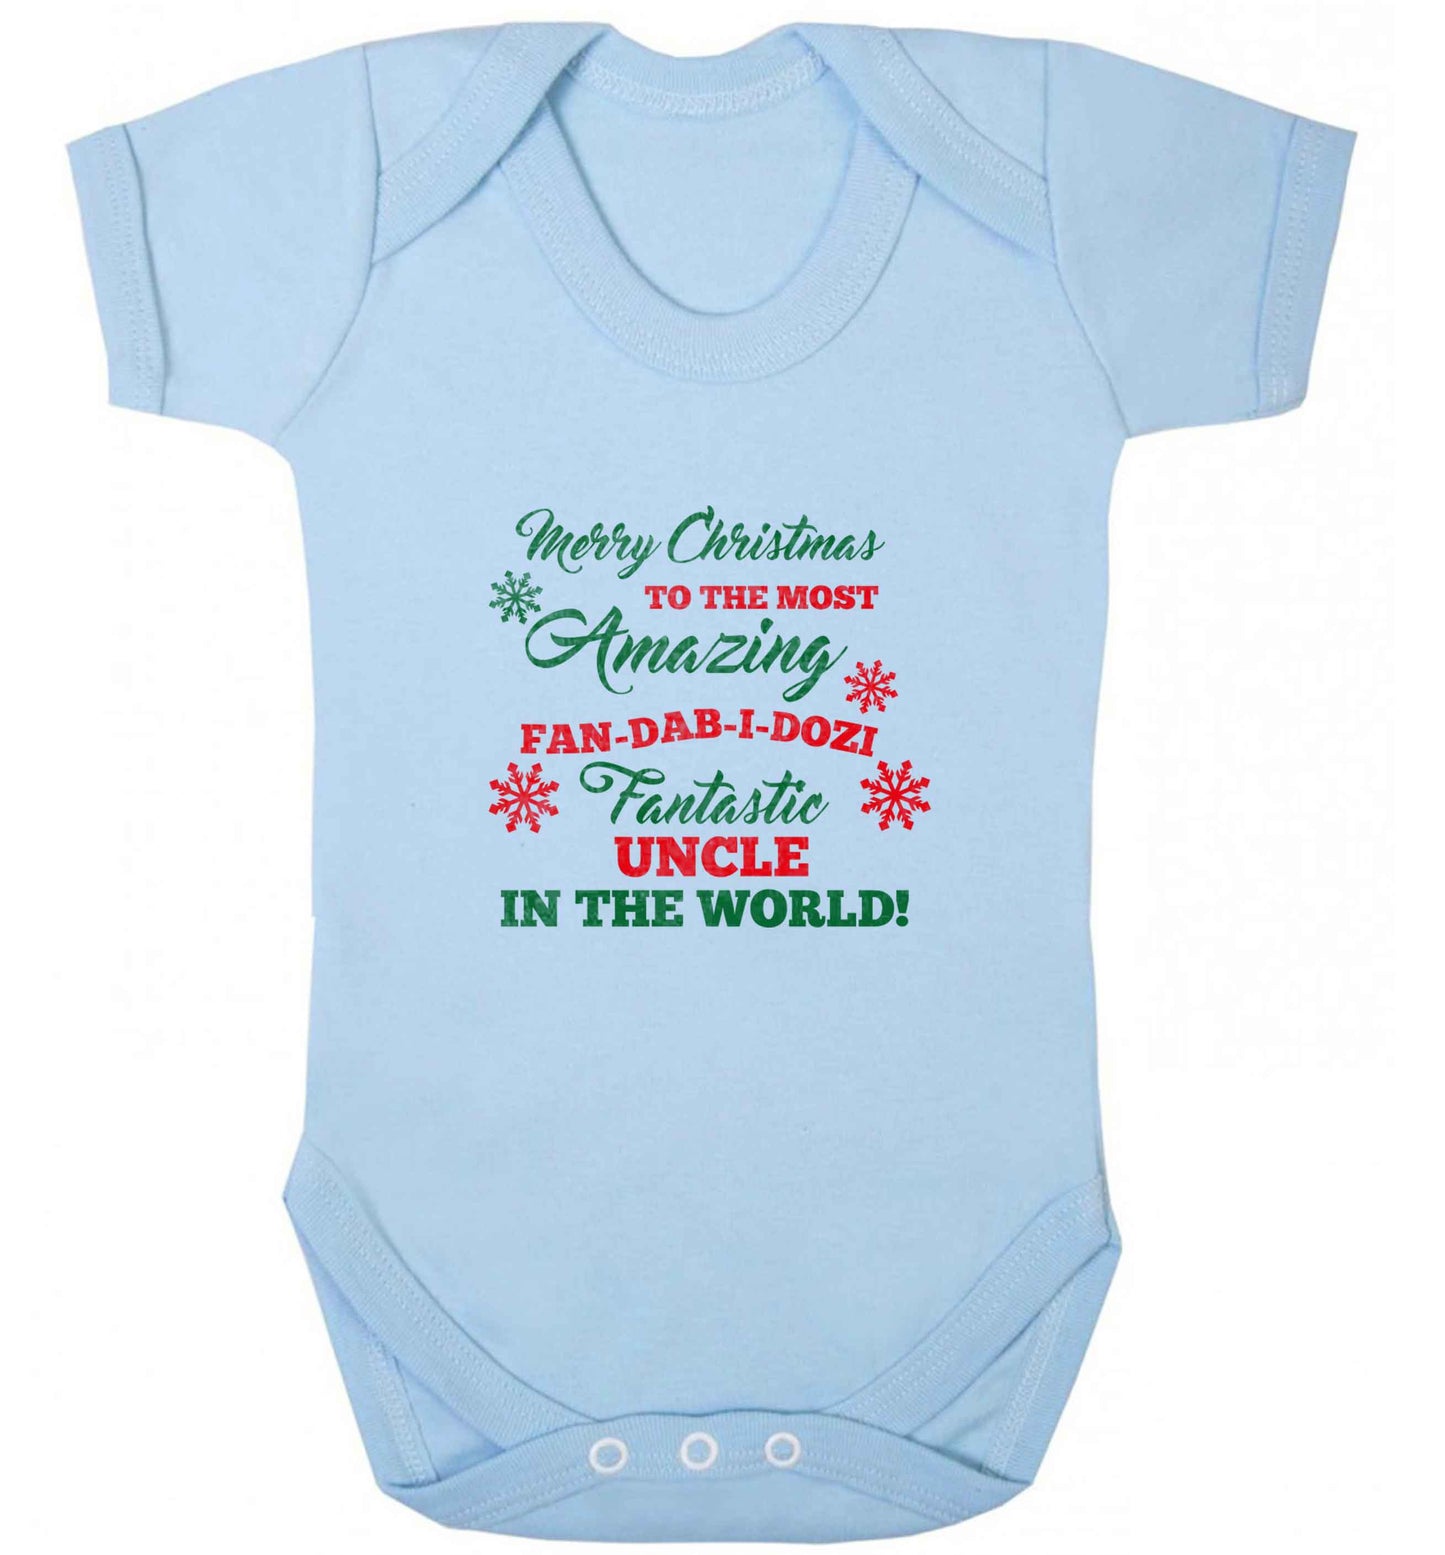 Merry Christmas to the most amazing fan-dab-i-dozi fantasic Uncle in the world baby vest pale blue 18-24 months